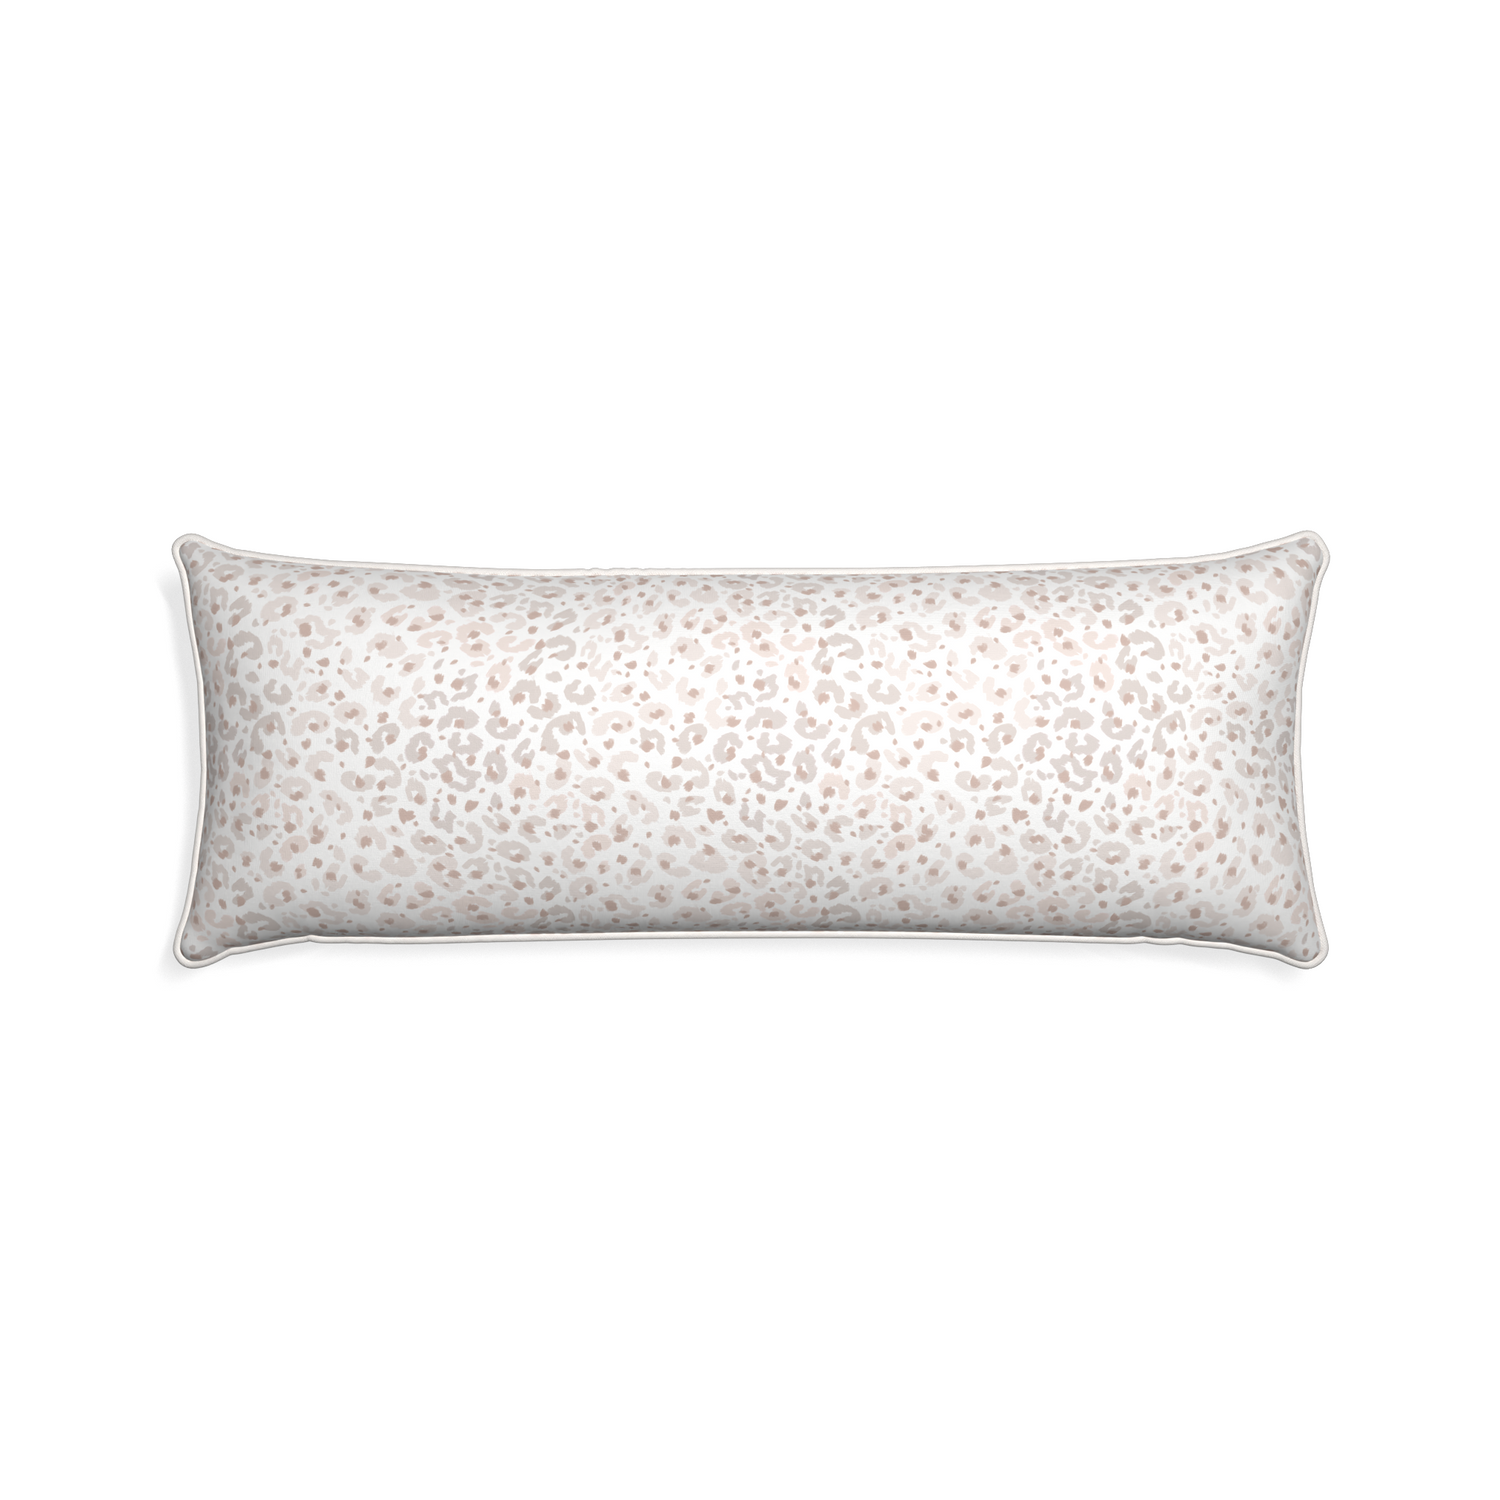 Xl-lumbar rosie custom beige animal printpillow with snow piping on white background